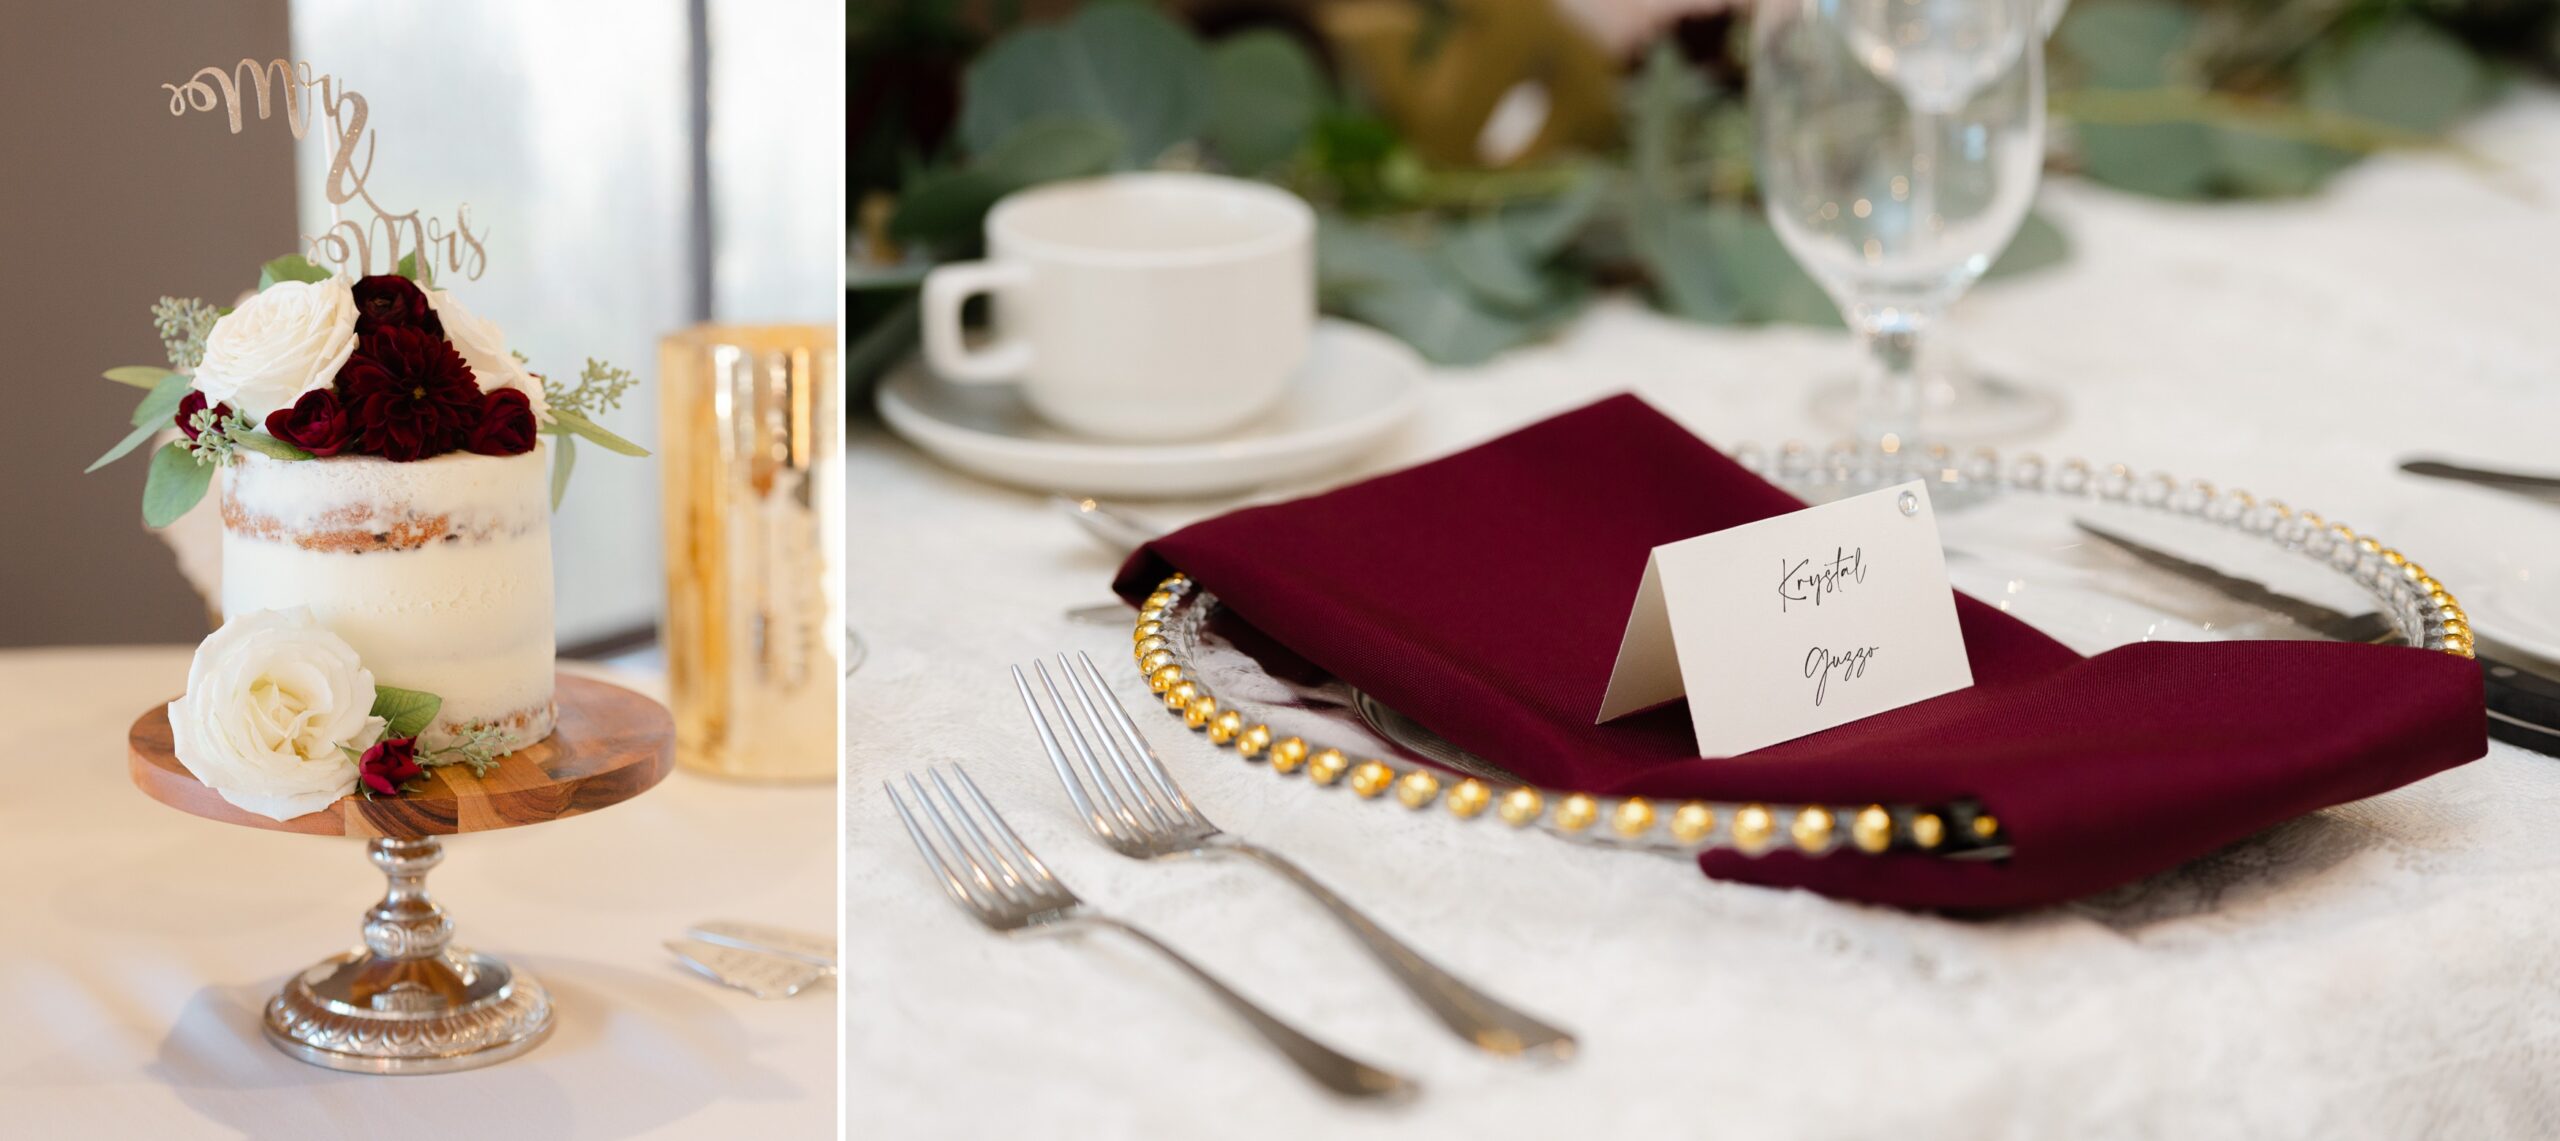 side by side photos of a naked wedding cake decorated with burgundy flowers and a table setting with gold charger plate and burgundy napkin. Details styled by Opportunity Knocks Events